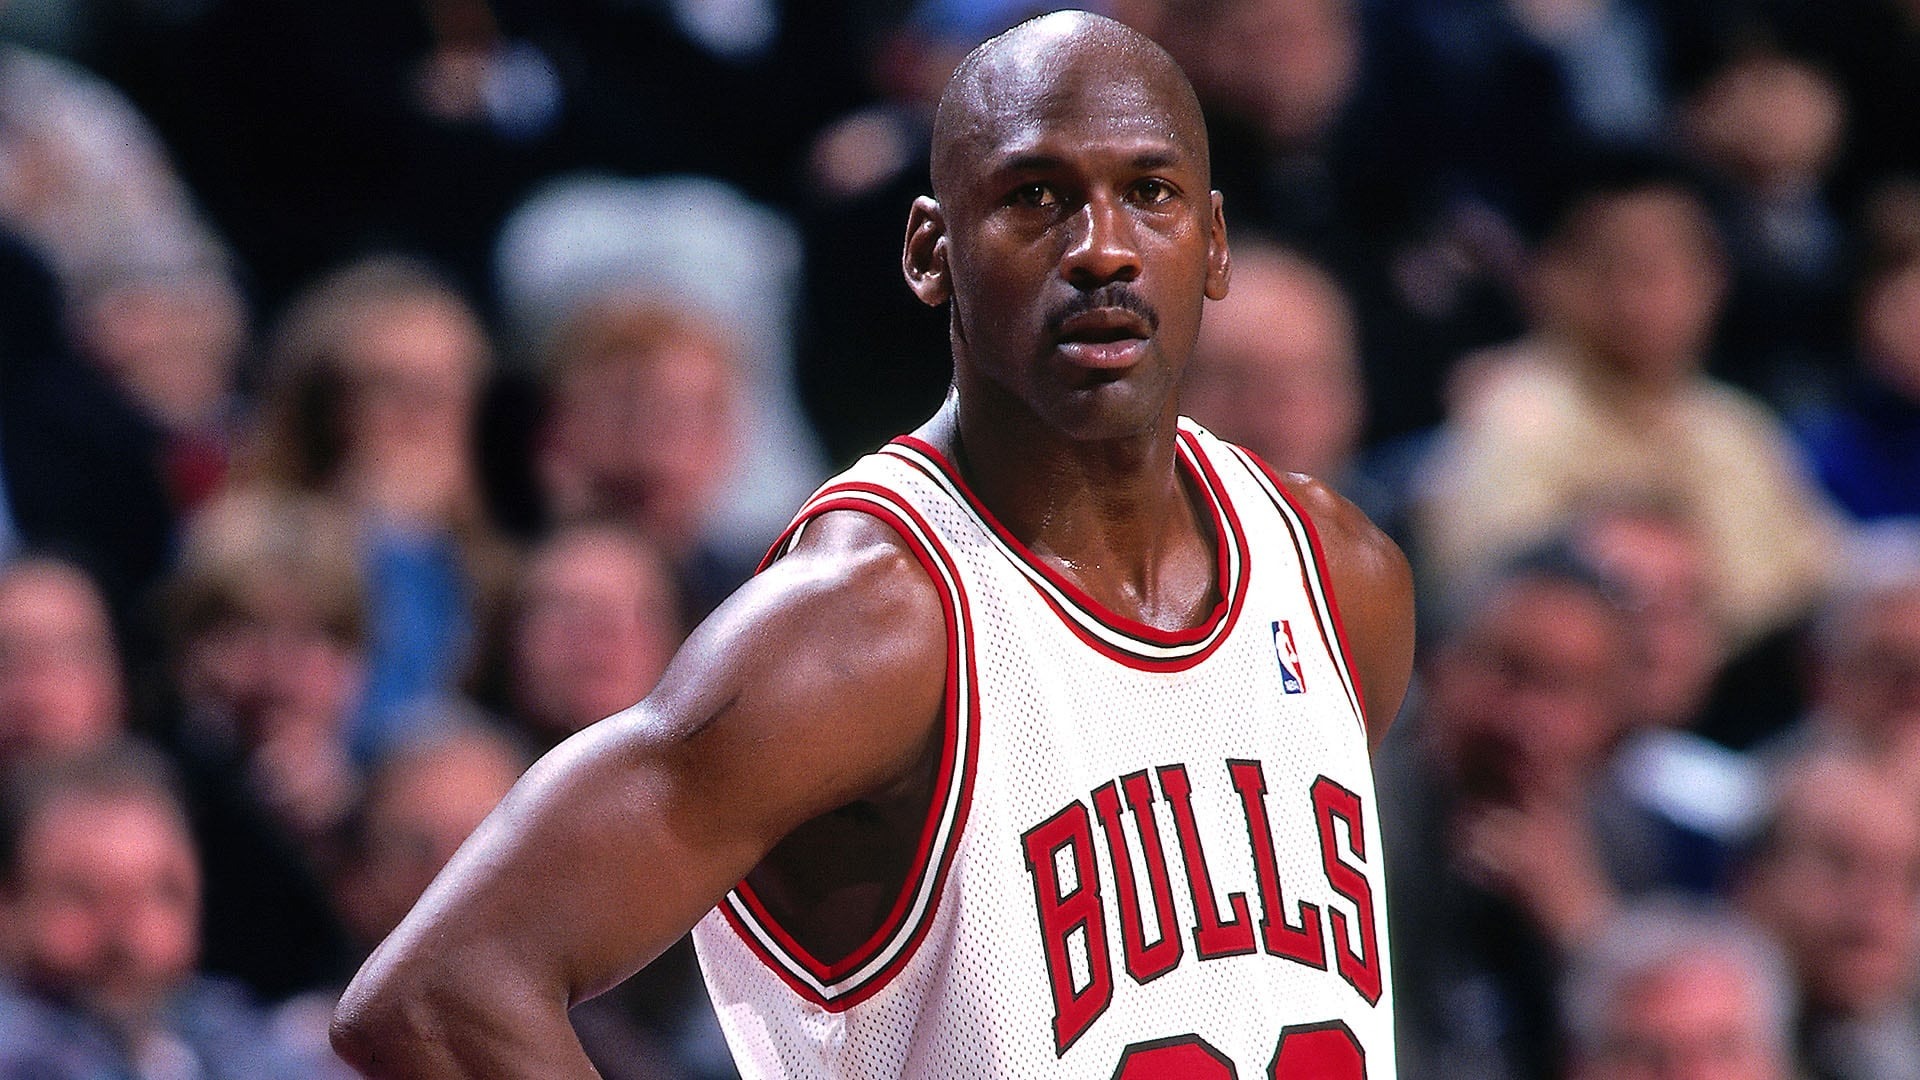 in 1993 a fan at a Chicago Bulls game won a shot to make a basket from half court for $1million and made it. The insurance company disqualified him because he played bball in college but the team paid him themselves and years later he met Michael Jordan who told him "we made them give it to you"